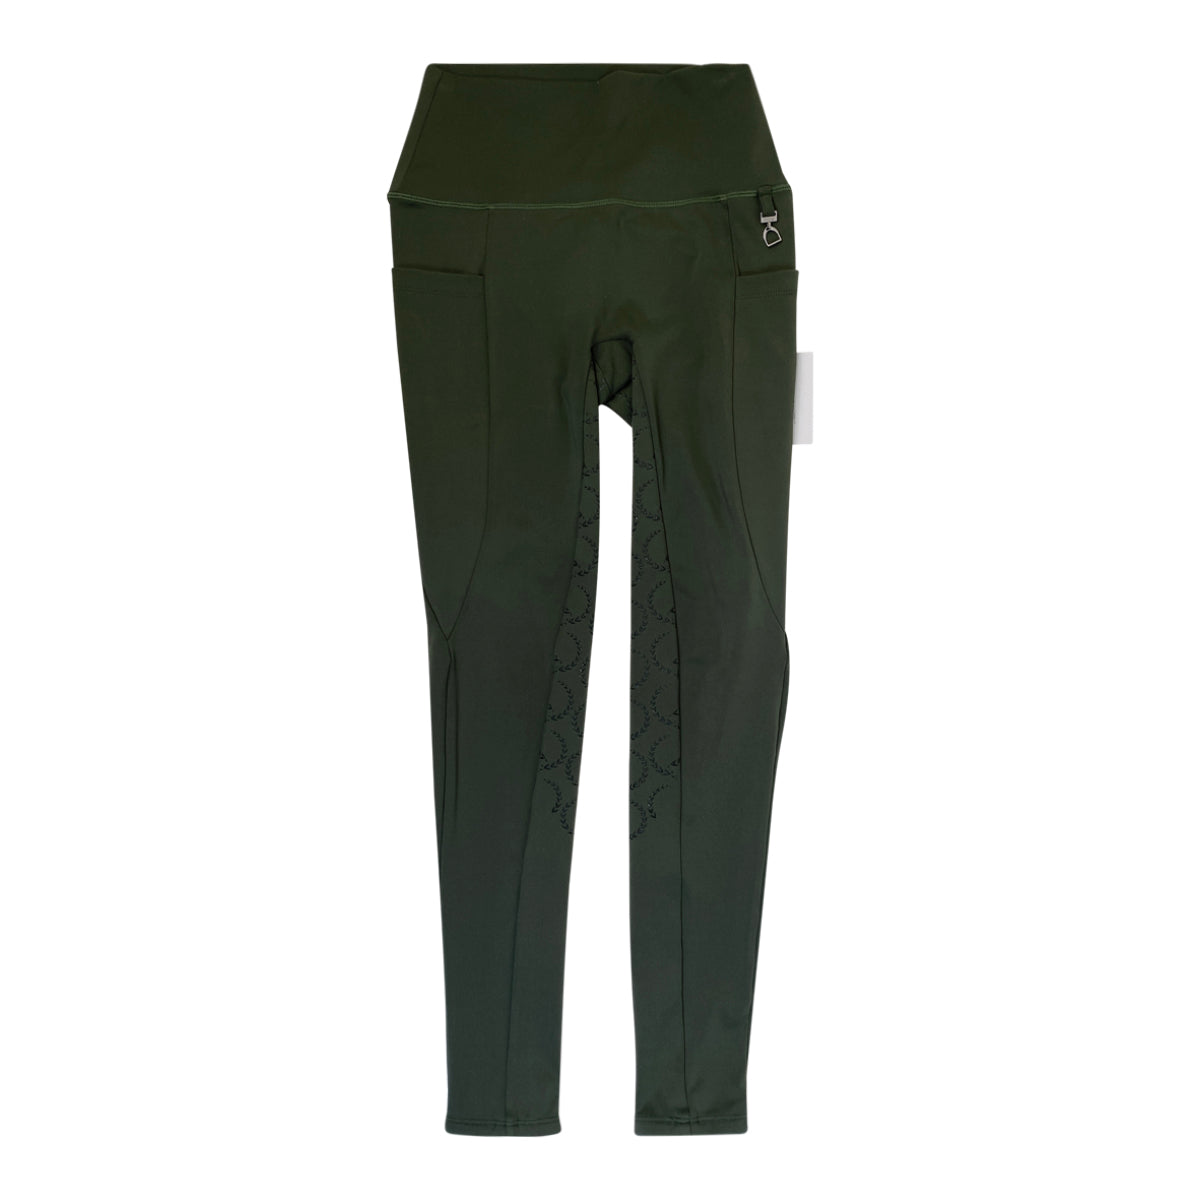 Horze Full Seat Grip Riding Tights in Hunter Green